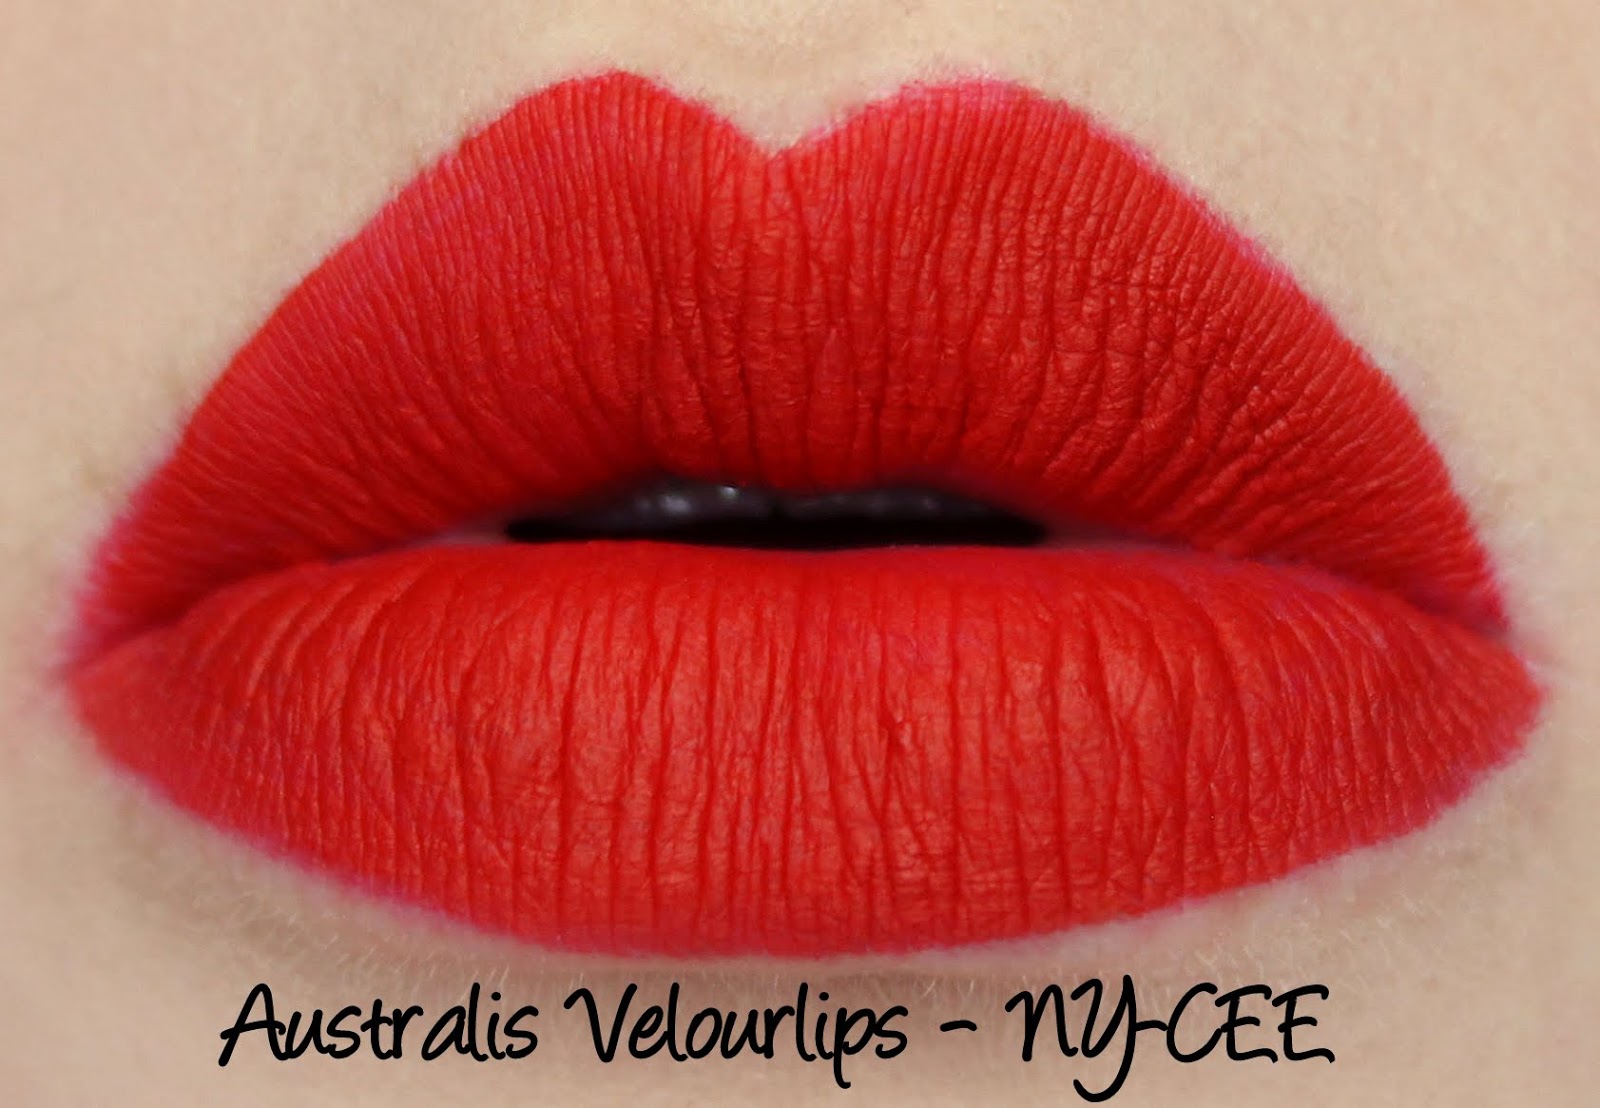 Australis Velourlips - NY-CEE Swatches & Review